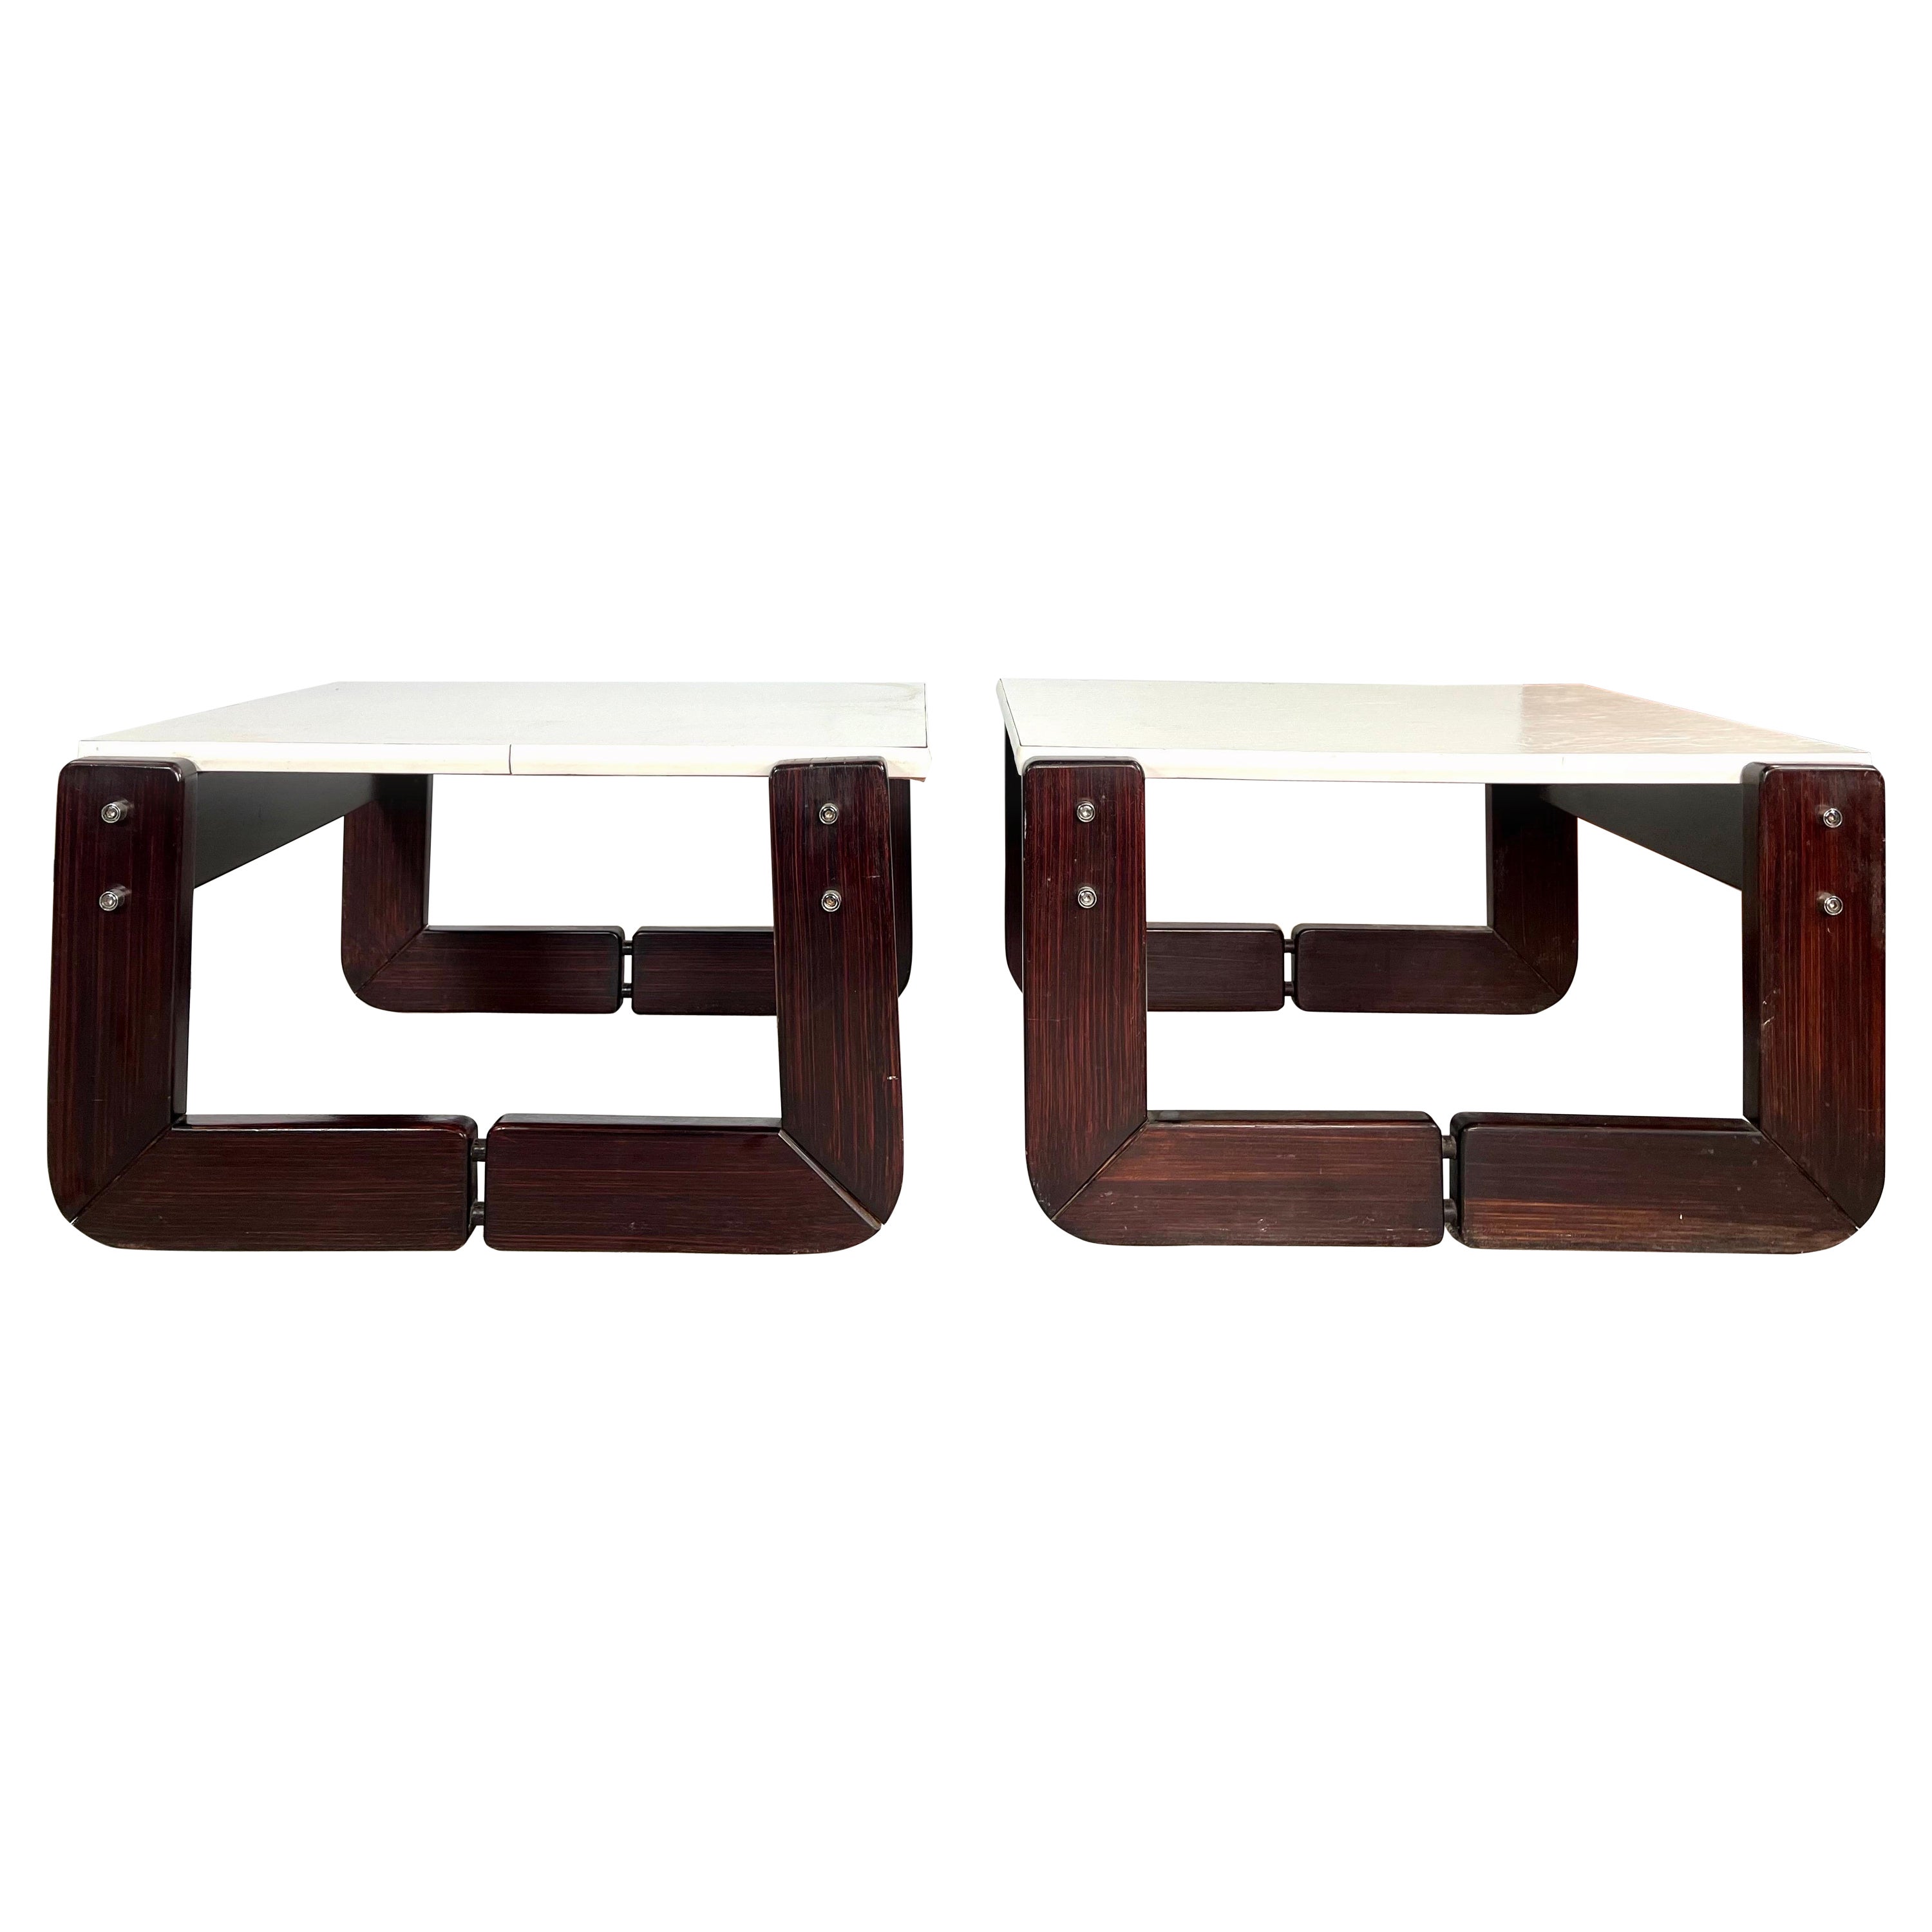 Rosewood and Laminate Top Side Tables by Percival Lafer, a Pair